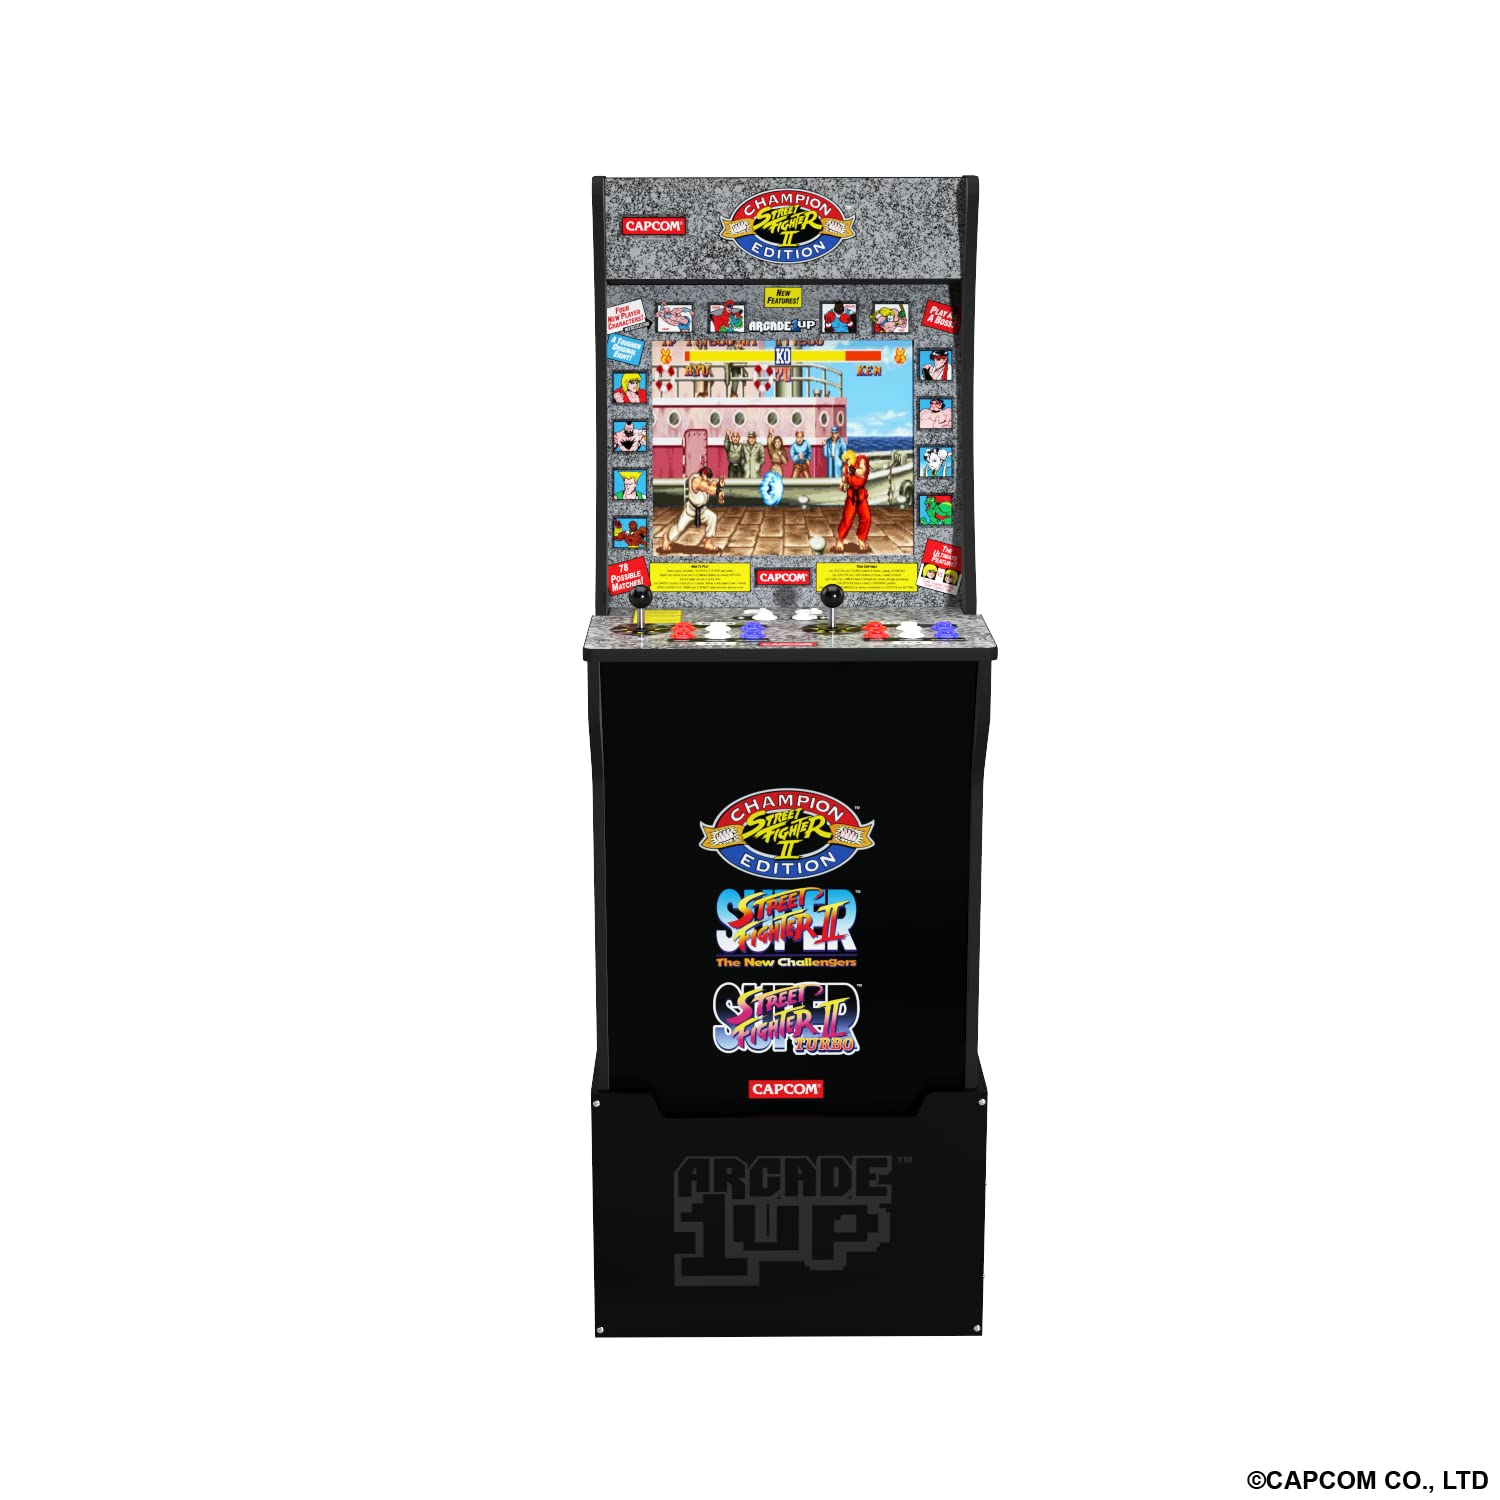 ARCADE1UP Street Fighter 2 - Classic 3-in-1 Home Arcade Cabinet with Licensed Riser